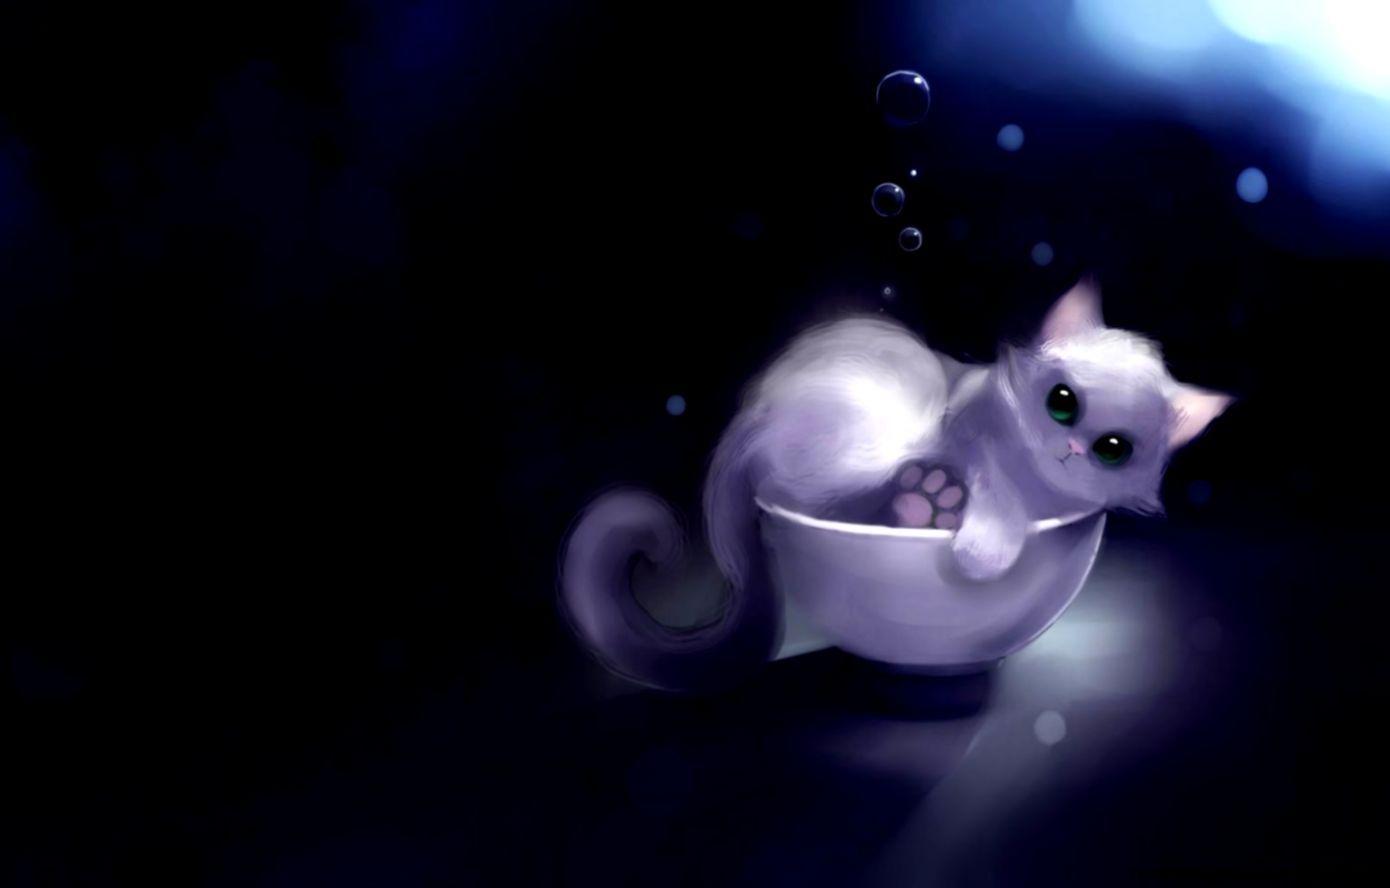 Cute Anime Cat Wallpapers - Top Free Cute Anime Cat Backgrounds